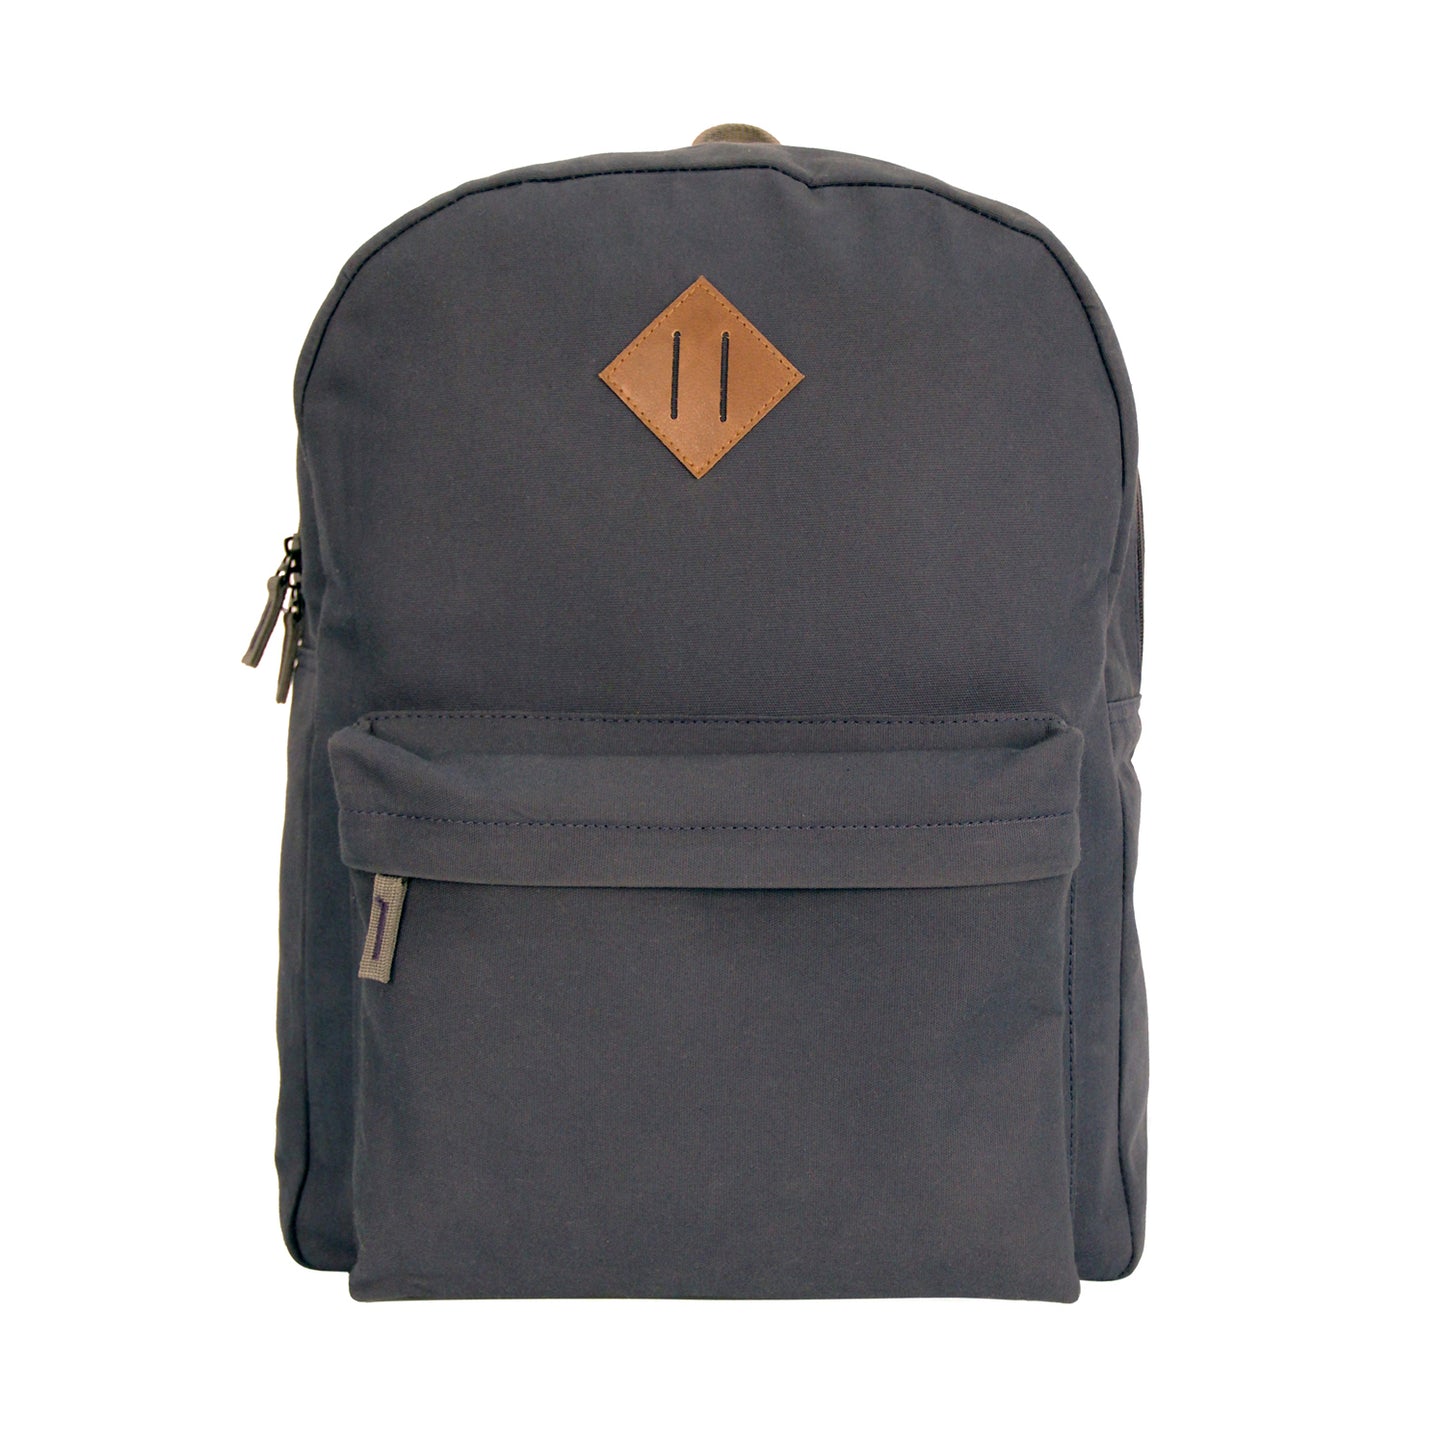 Navy Canvas Backpack